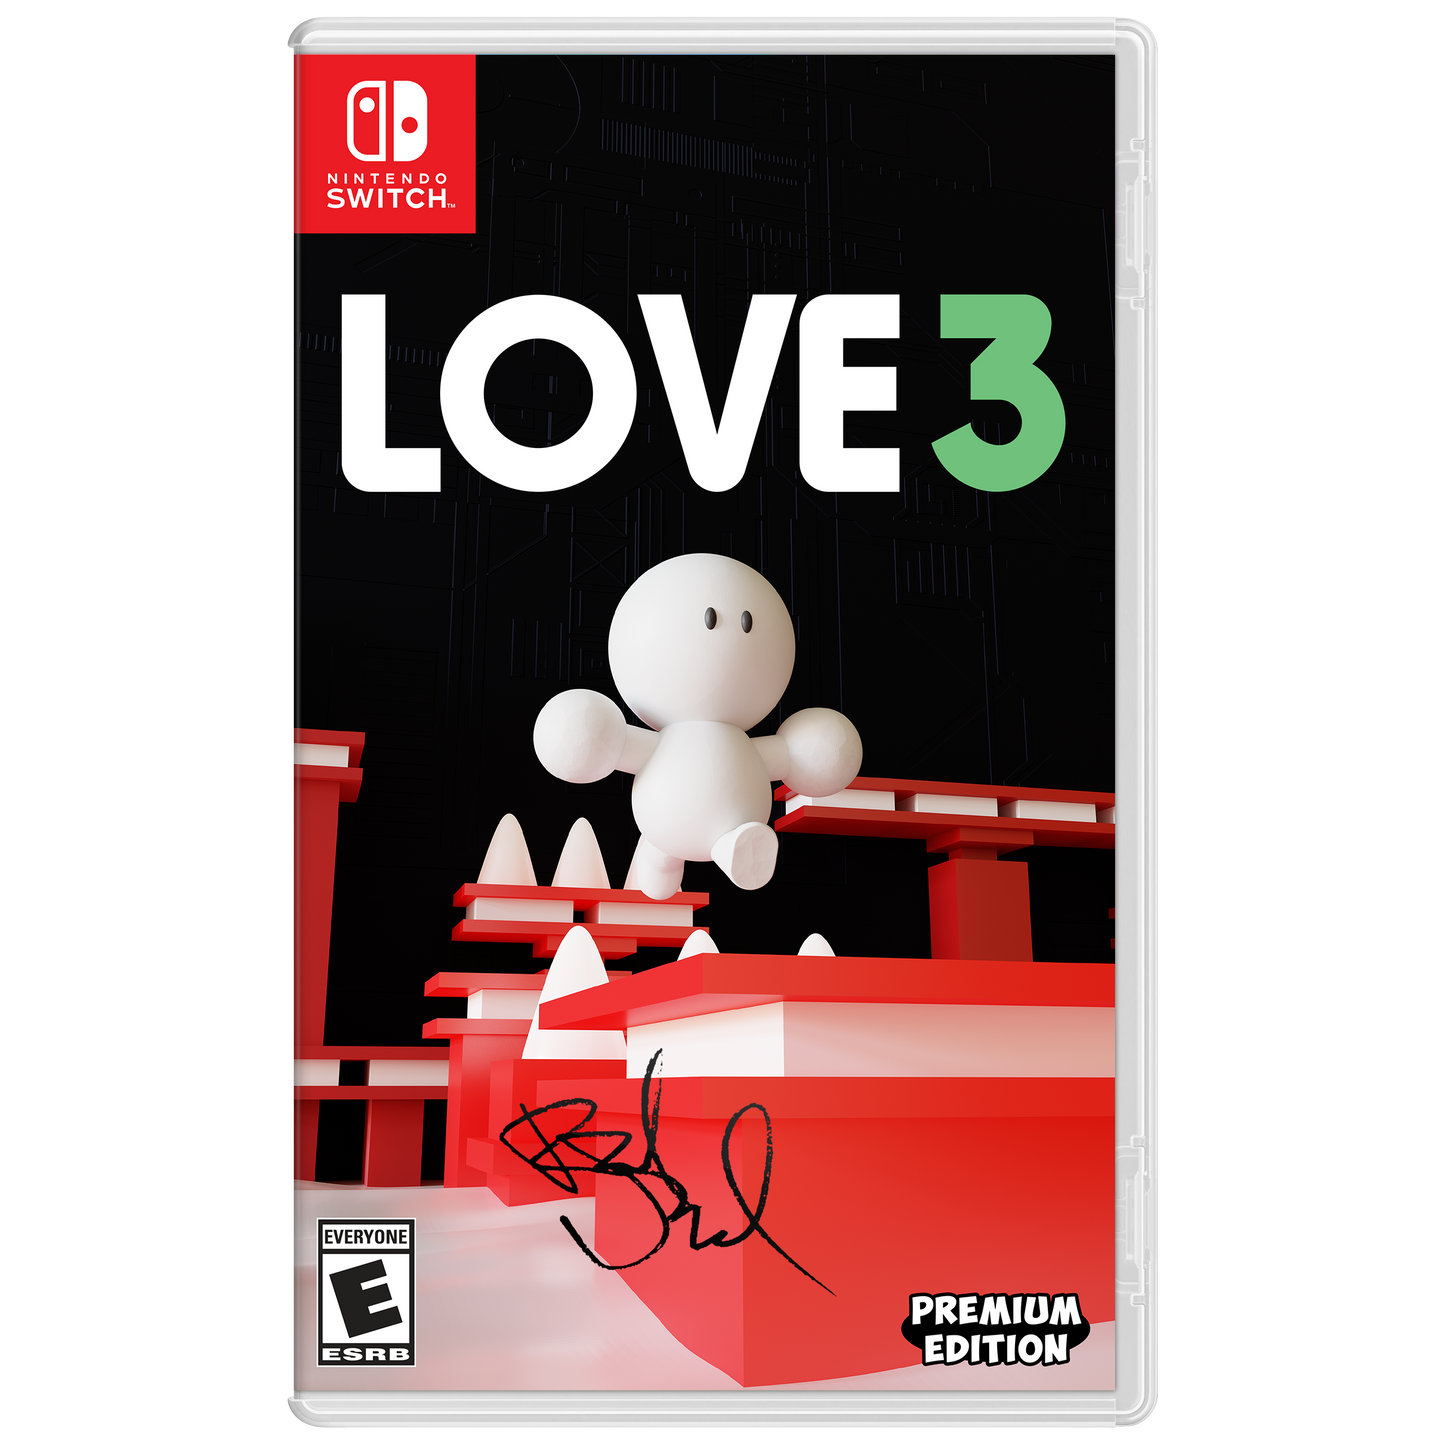 LOVE 3 - Nintendo Switch (Physical)